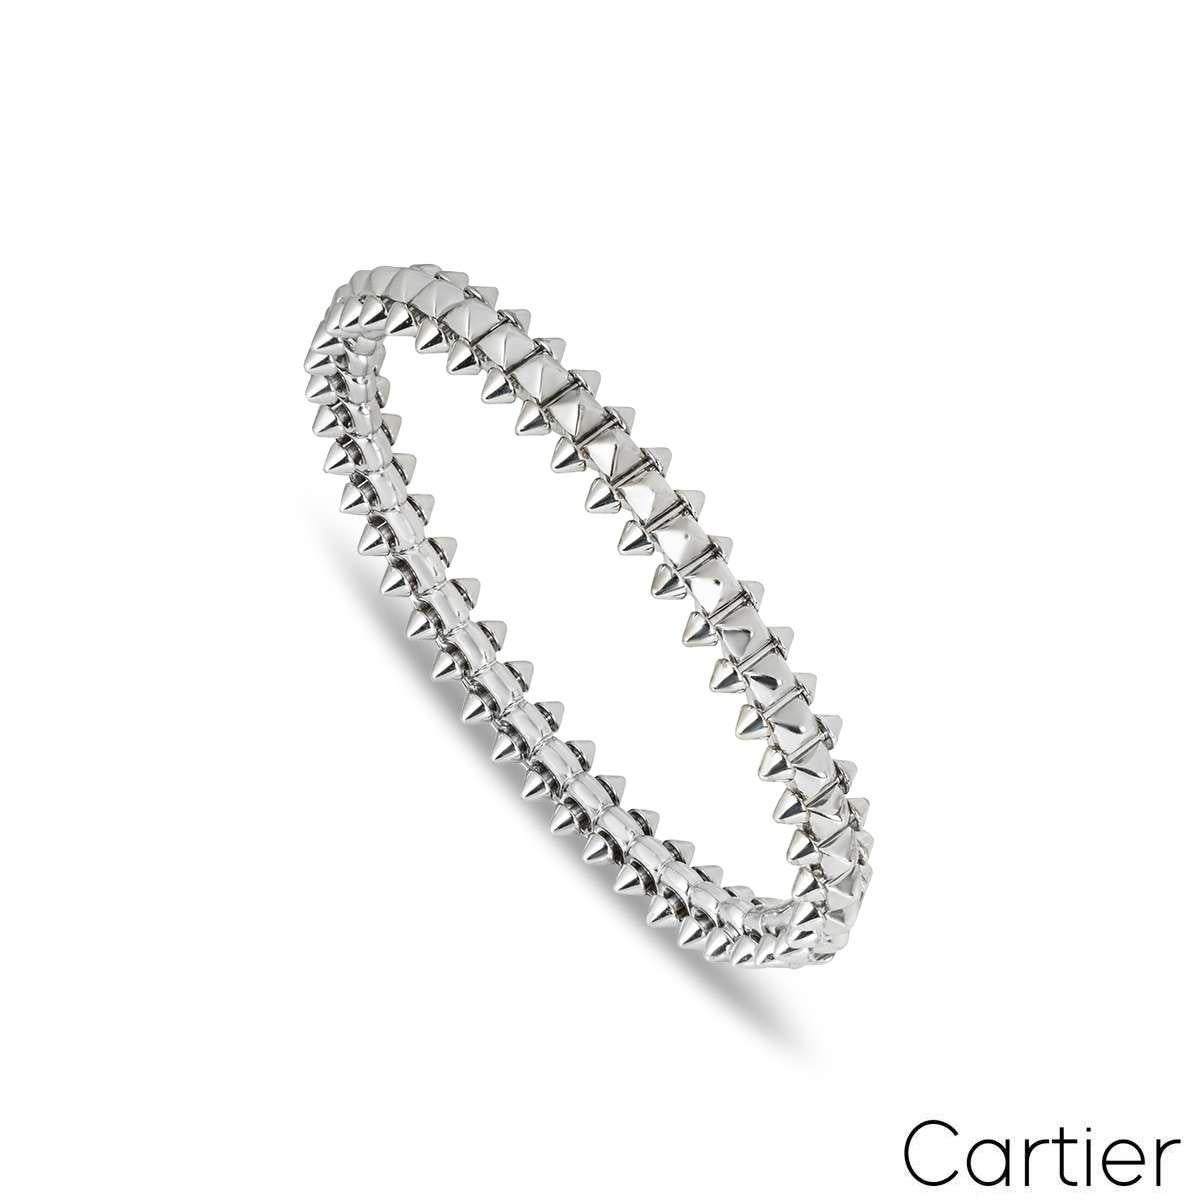 An 18k white gold bracelet from Cartier's Clash de Cartier collection. The bracelets design is composed of a studded style centre which is complemented by by smaller studs all the way round. The clasp operates with a simple lift and push system on